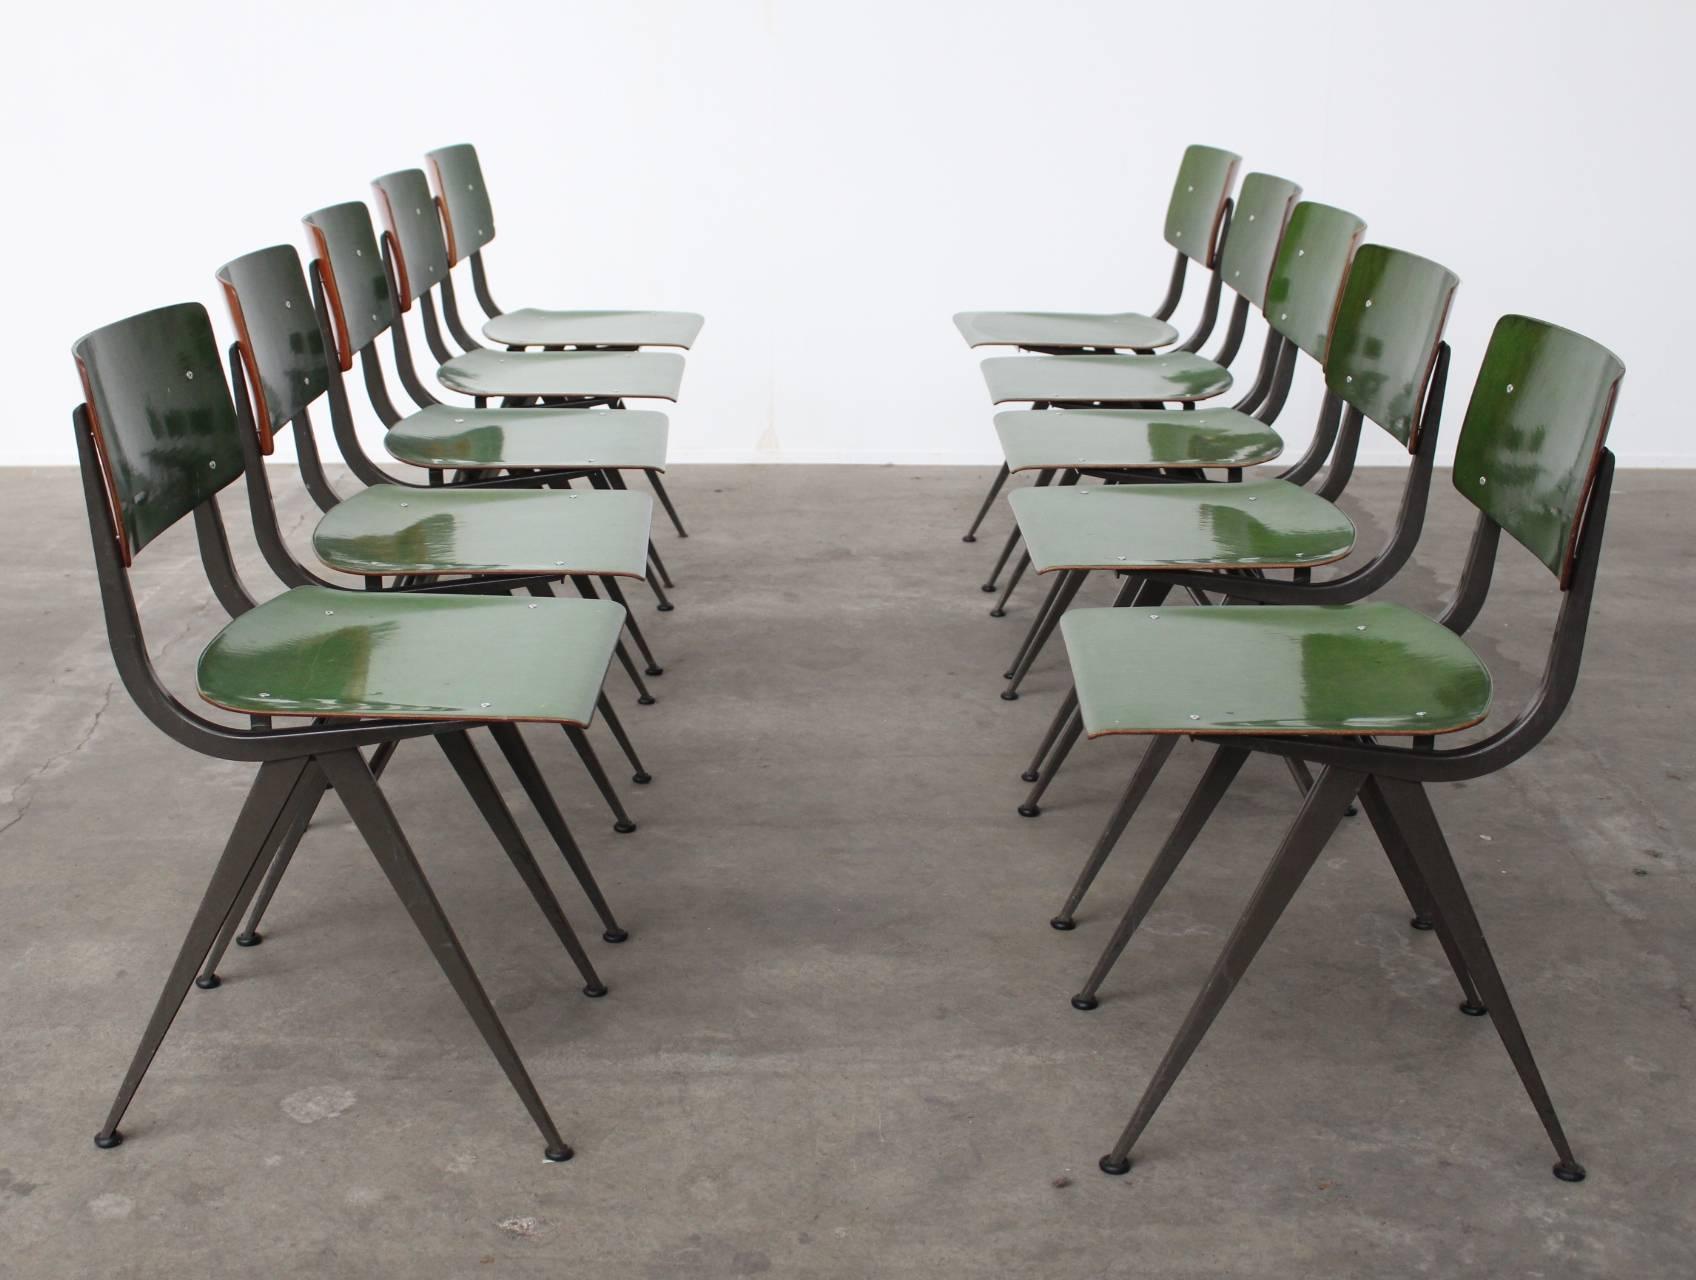 Wonderful set of ten green lacquered (only the front side) Industrial compass chairs by the Dutch furniture factory Marko. These chairs are spray painted in a very unusual green; as a bespoke ordered request to the factory, therefore extremely rare